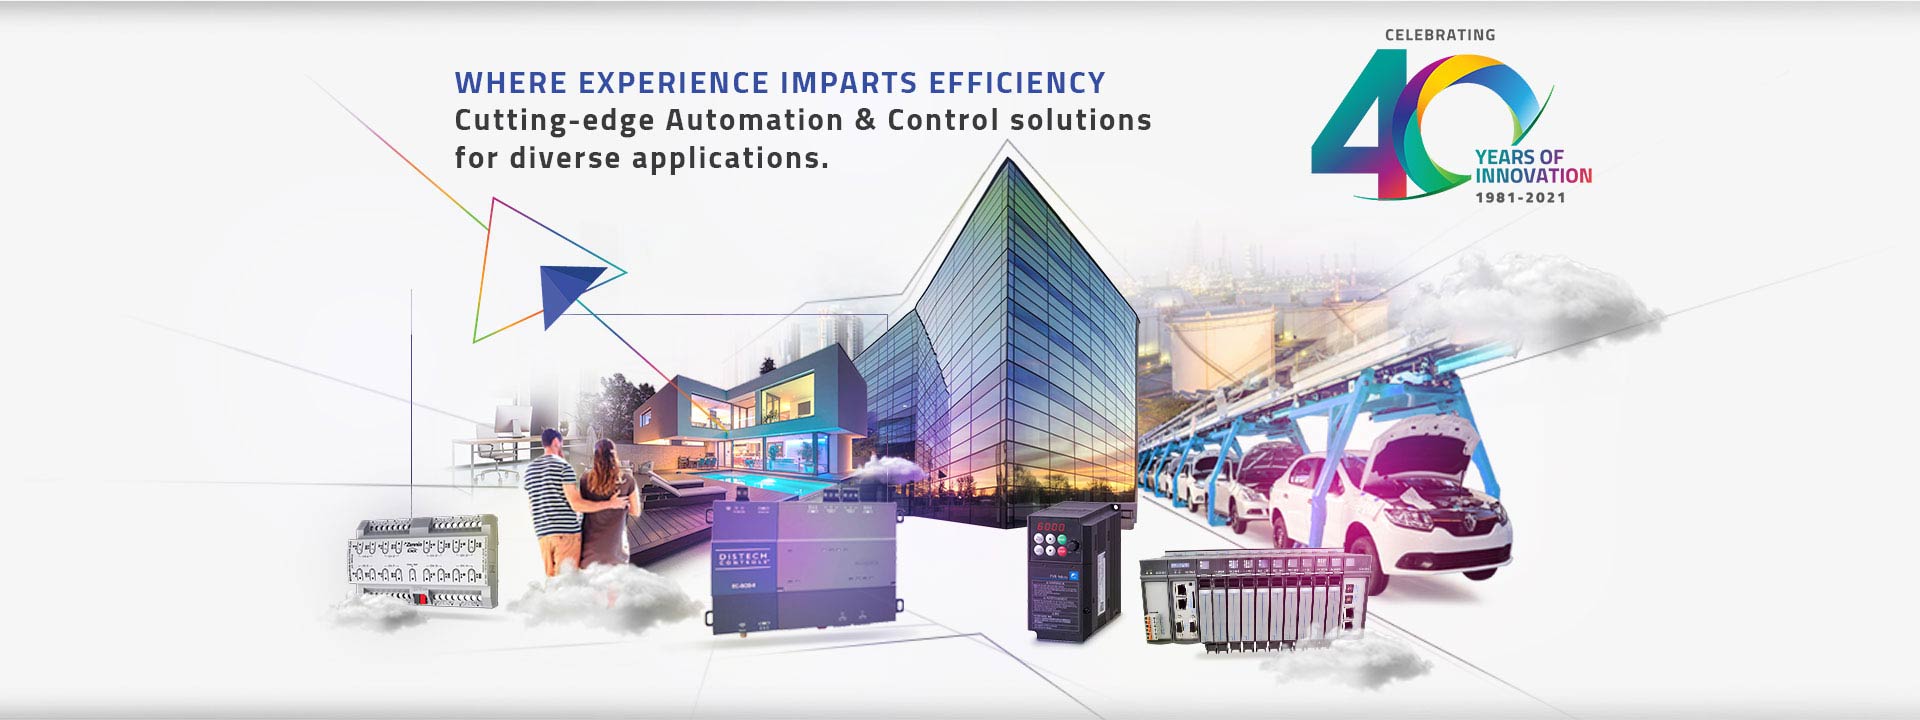 industrial automation systems & control solutions in India